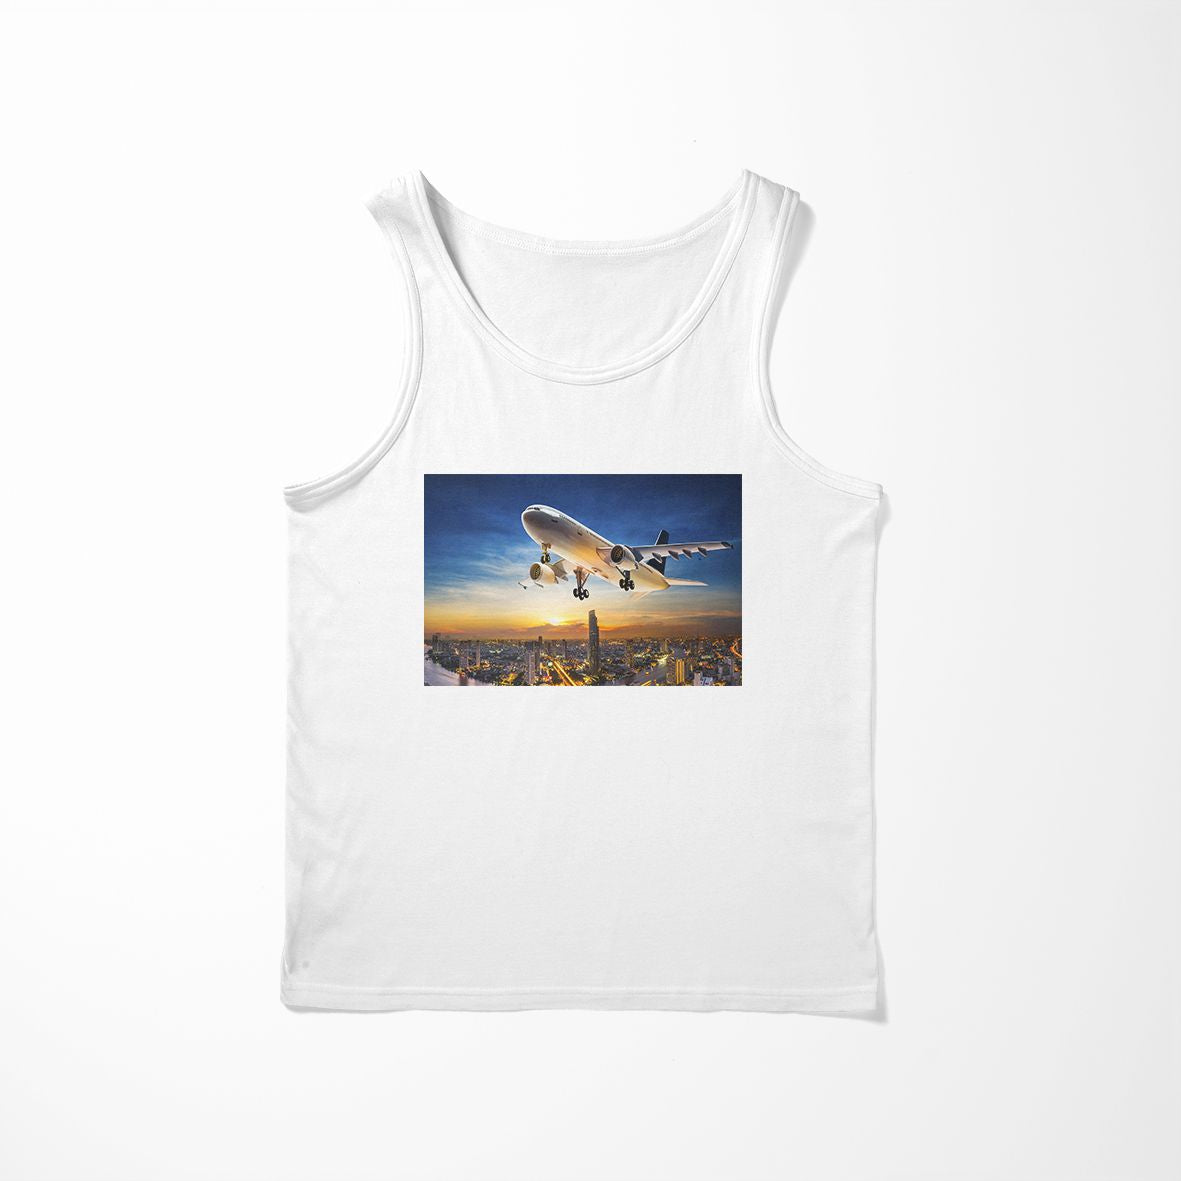 Super Aircraft over City at Sunset Designed Tank Tops